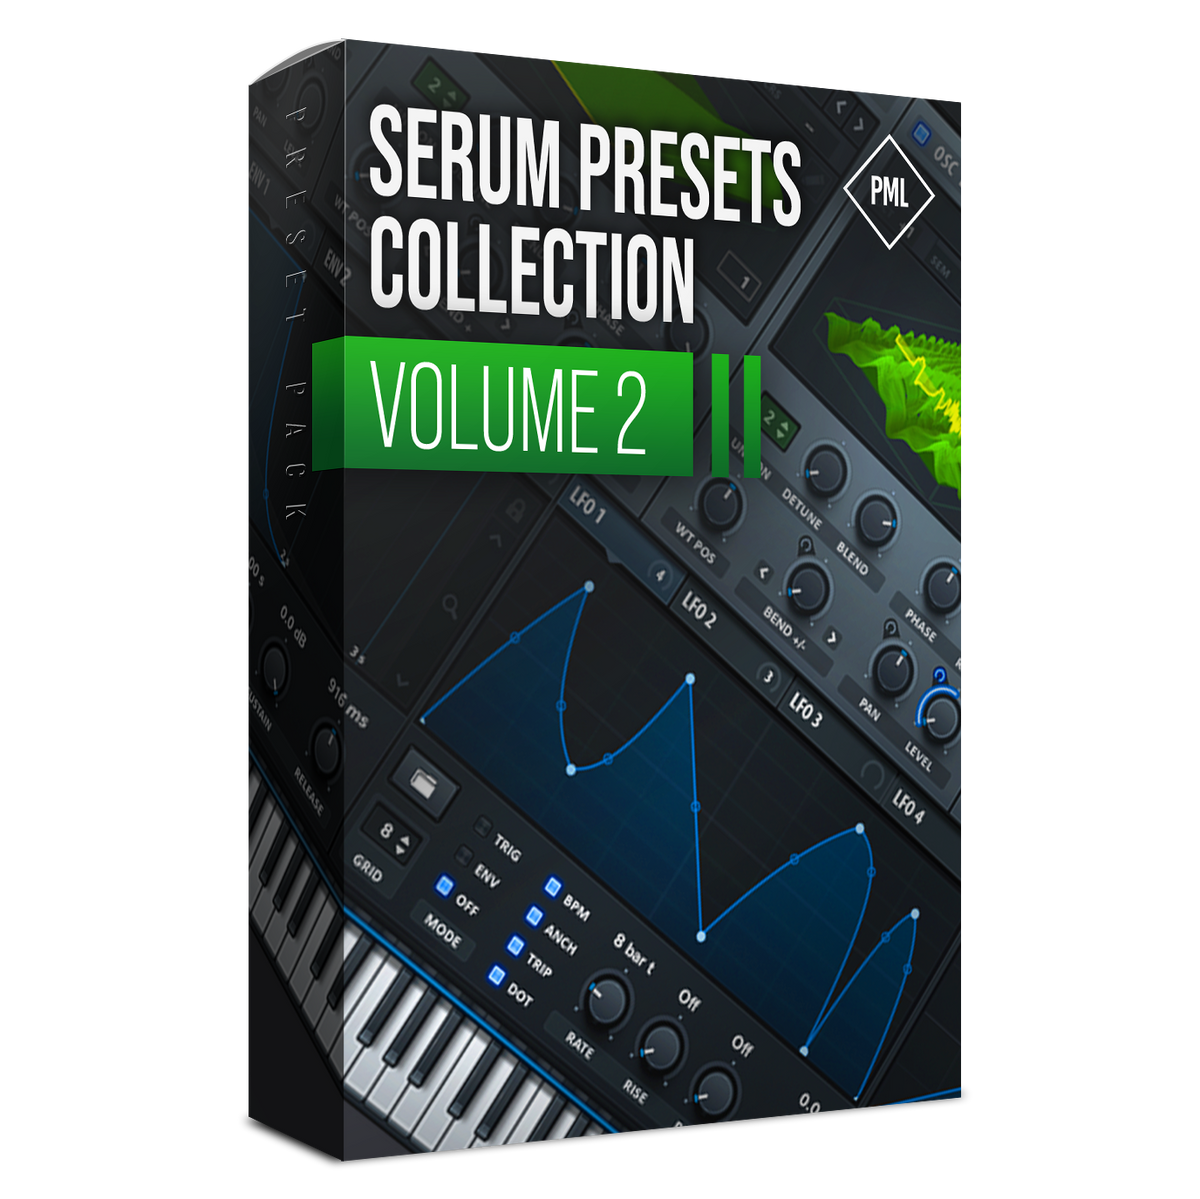 Serum Presets Collection Vol. 2 Product Box